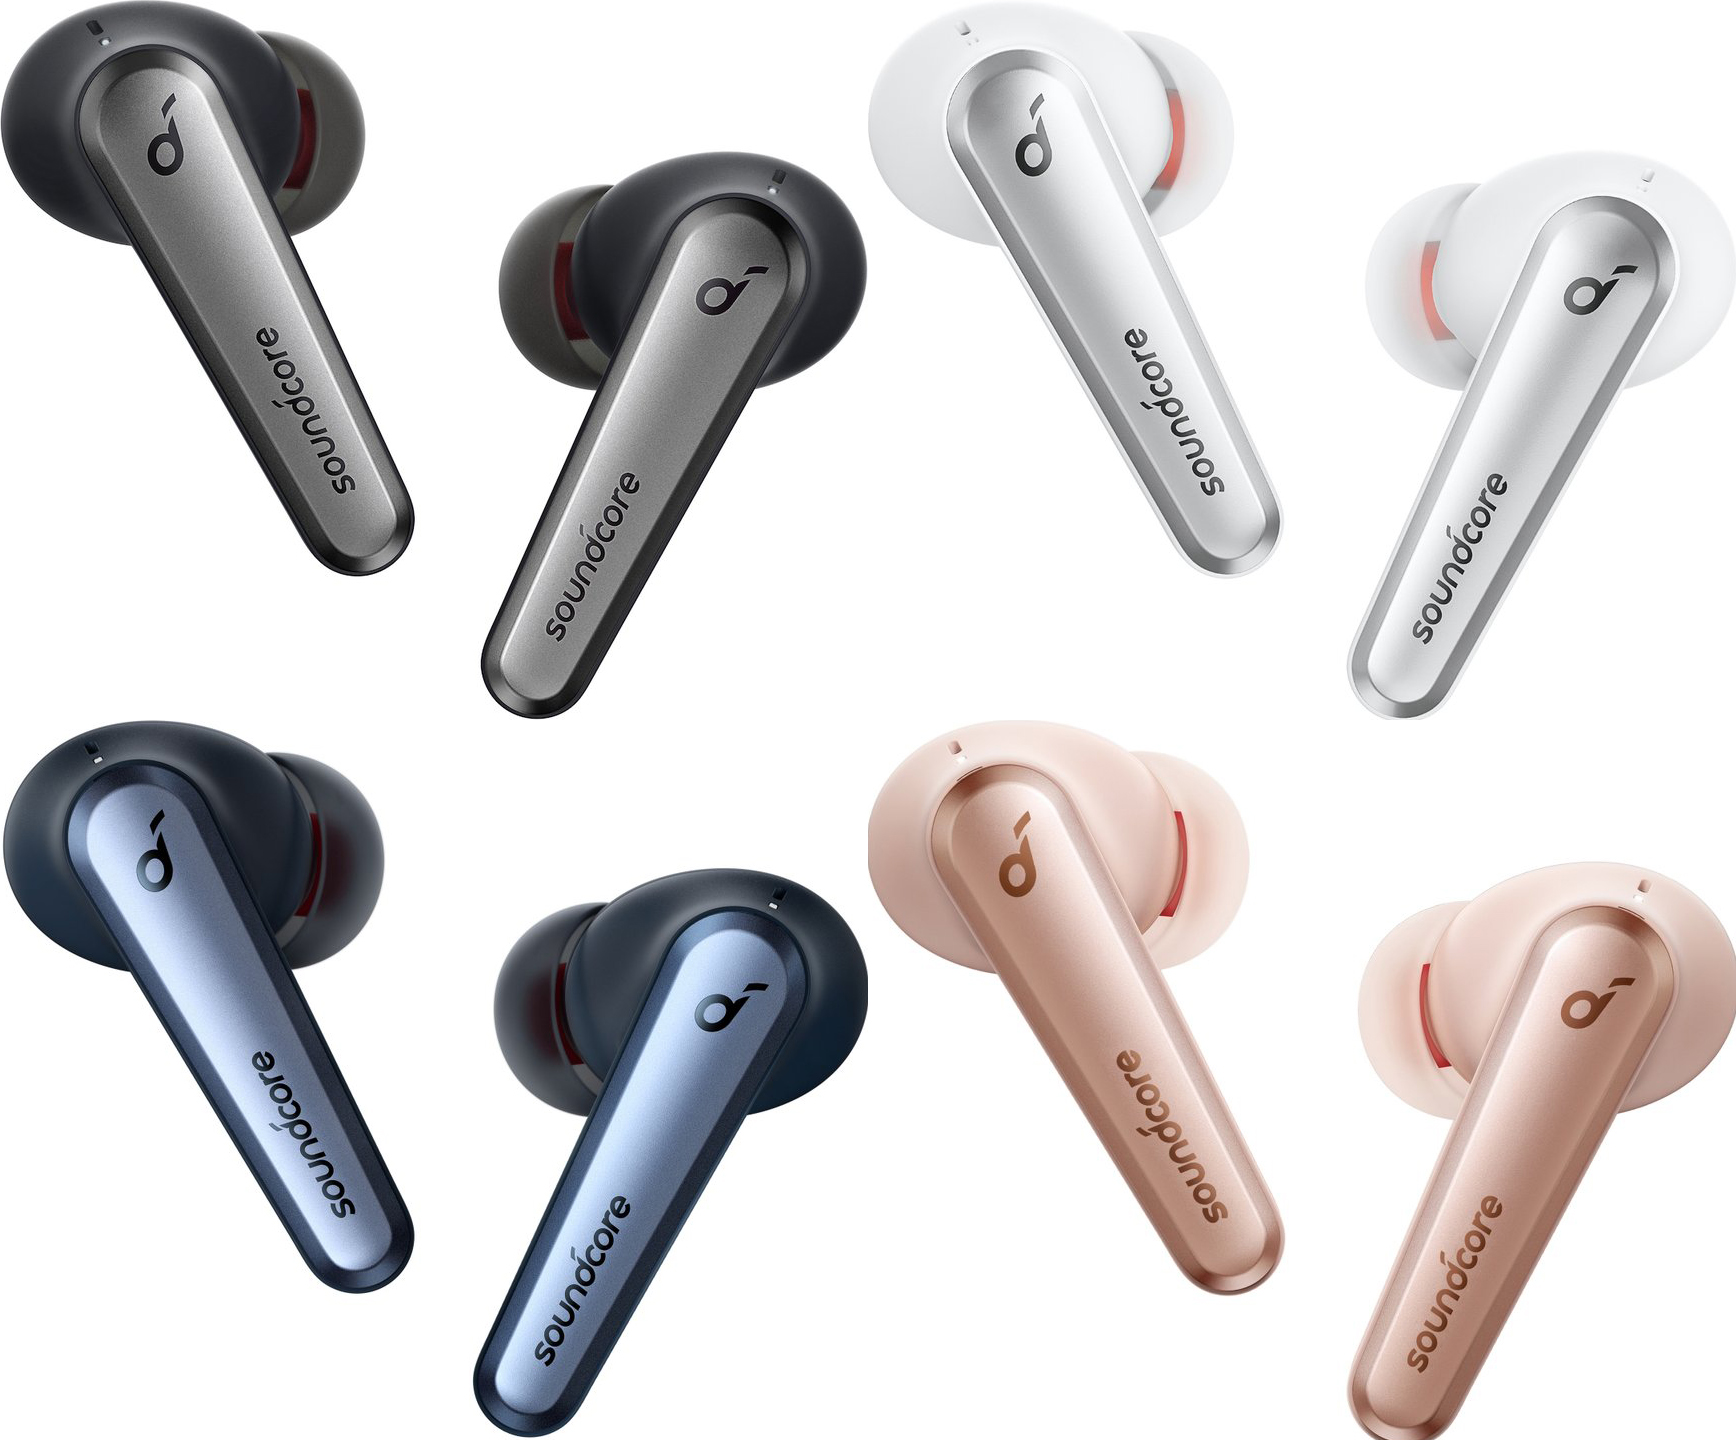 Anker Soundcore Liberty Air 2 Pro bring AirPods Pro features for under $130